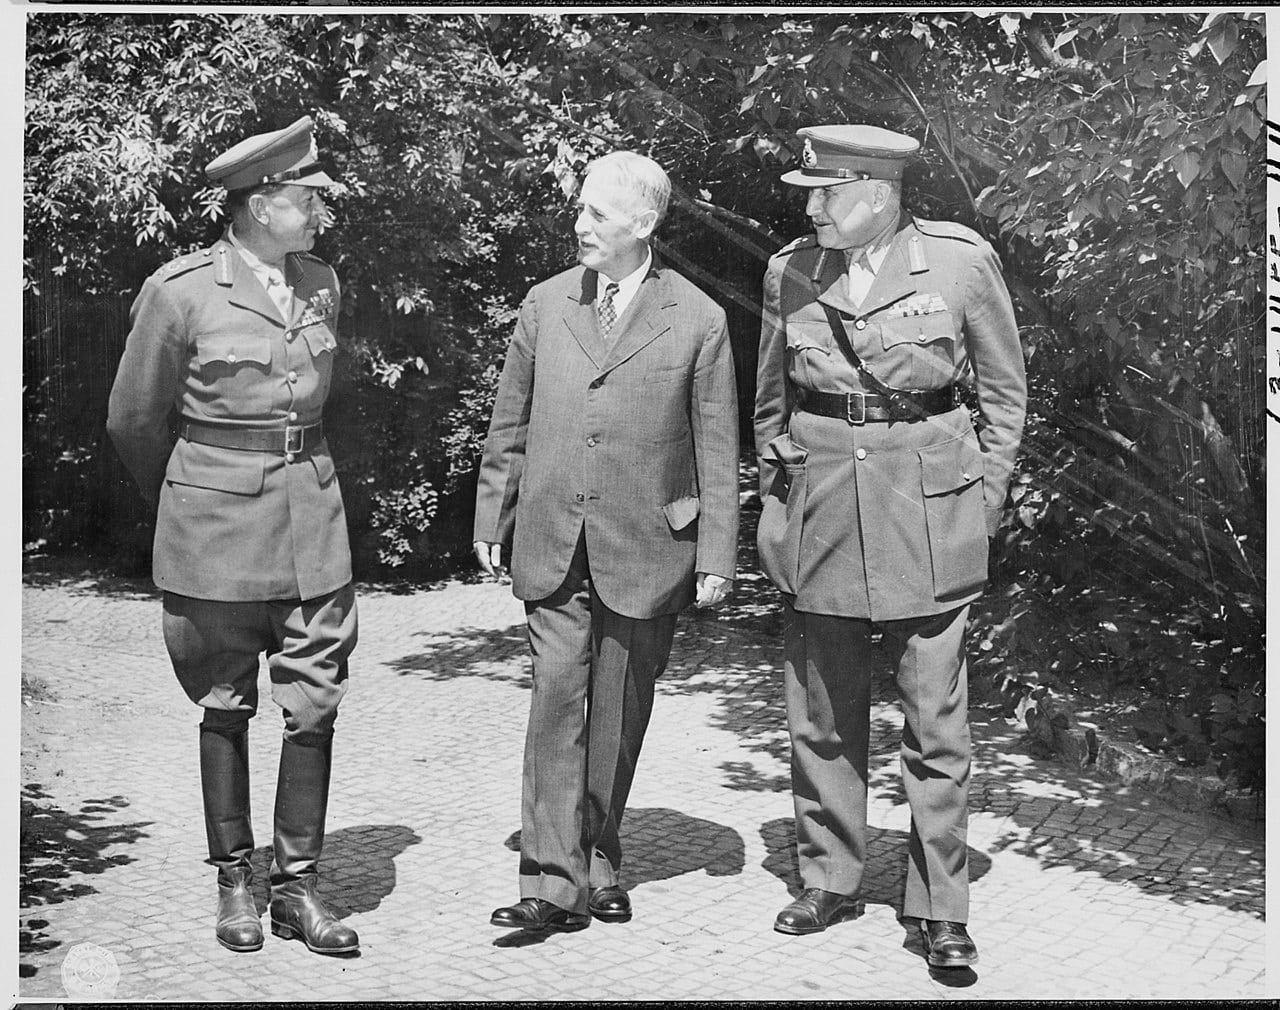 The Potsdam Conference - July 22nd 1945 - US Secretary of War Henry Stimson chatting with British Field Marshals Alexander and Maitland Wilson